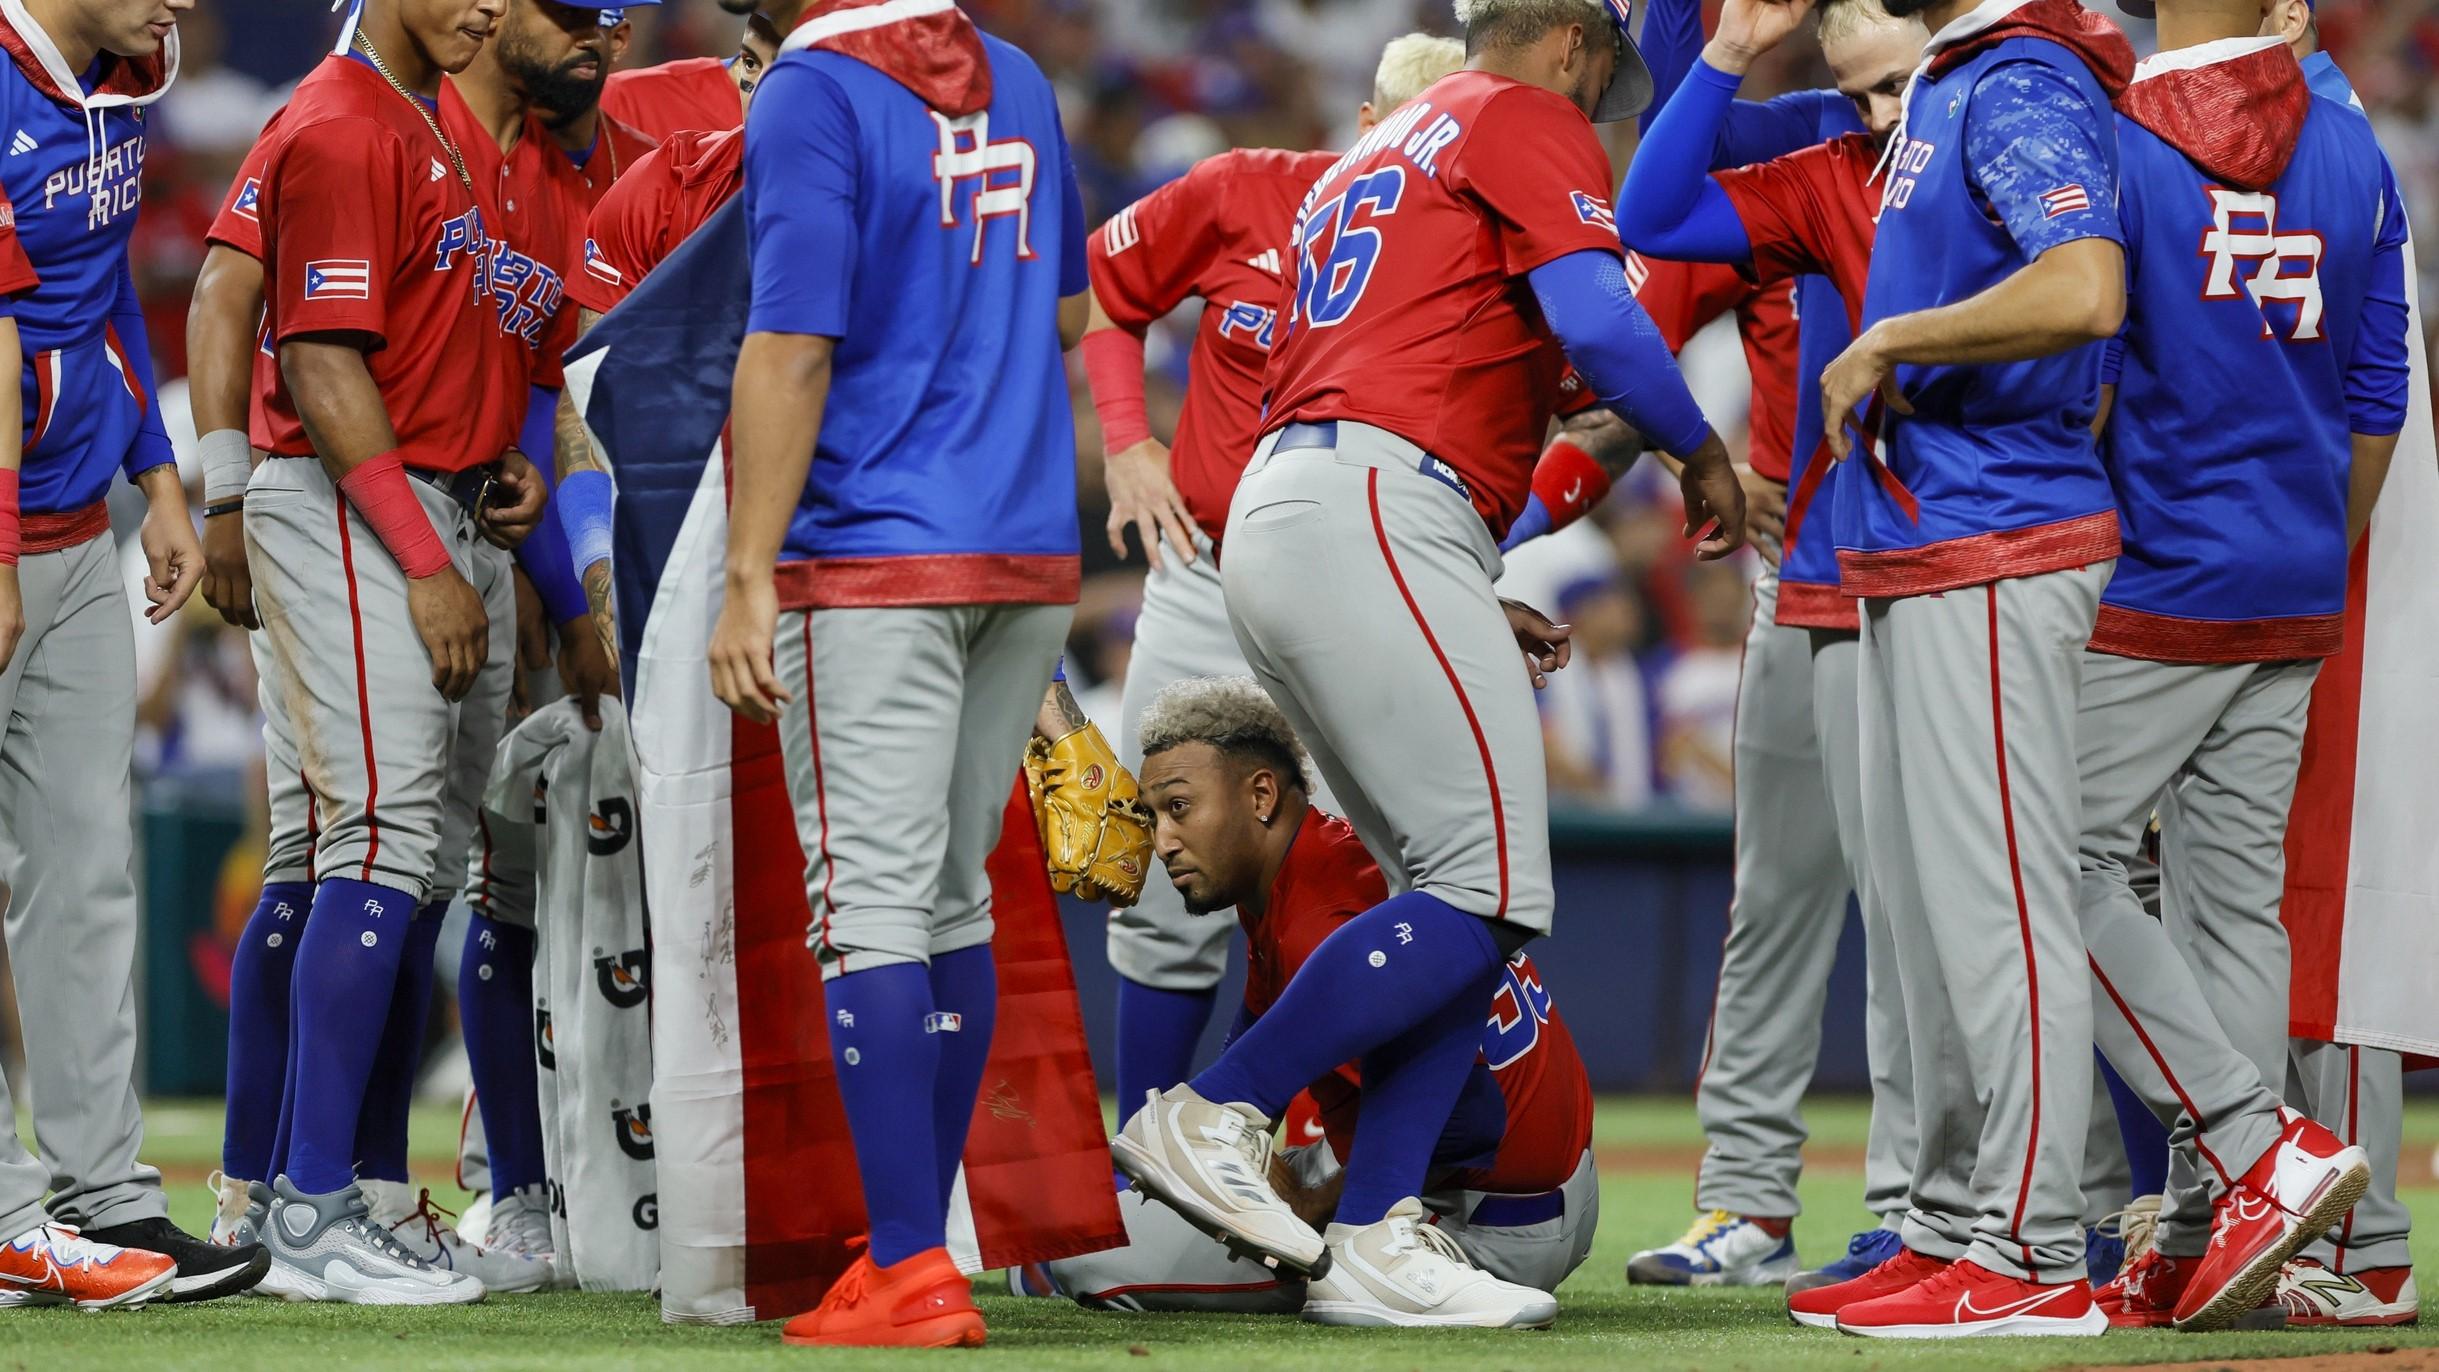 Mar 15, 2023; Miami, Florida, USA; Puerto Rico relief pitcher Edwin Diaz (39) looks on while sitting on the field after an apparent leg injury during the team celebration after winning the game against Dominican Republic at LoanDepot Park. / Sam Navarro-USA TODAY Sports